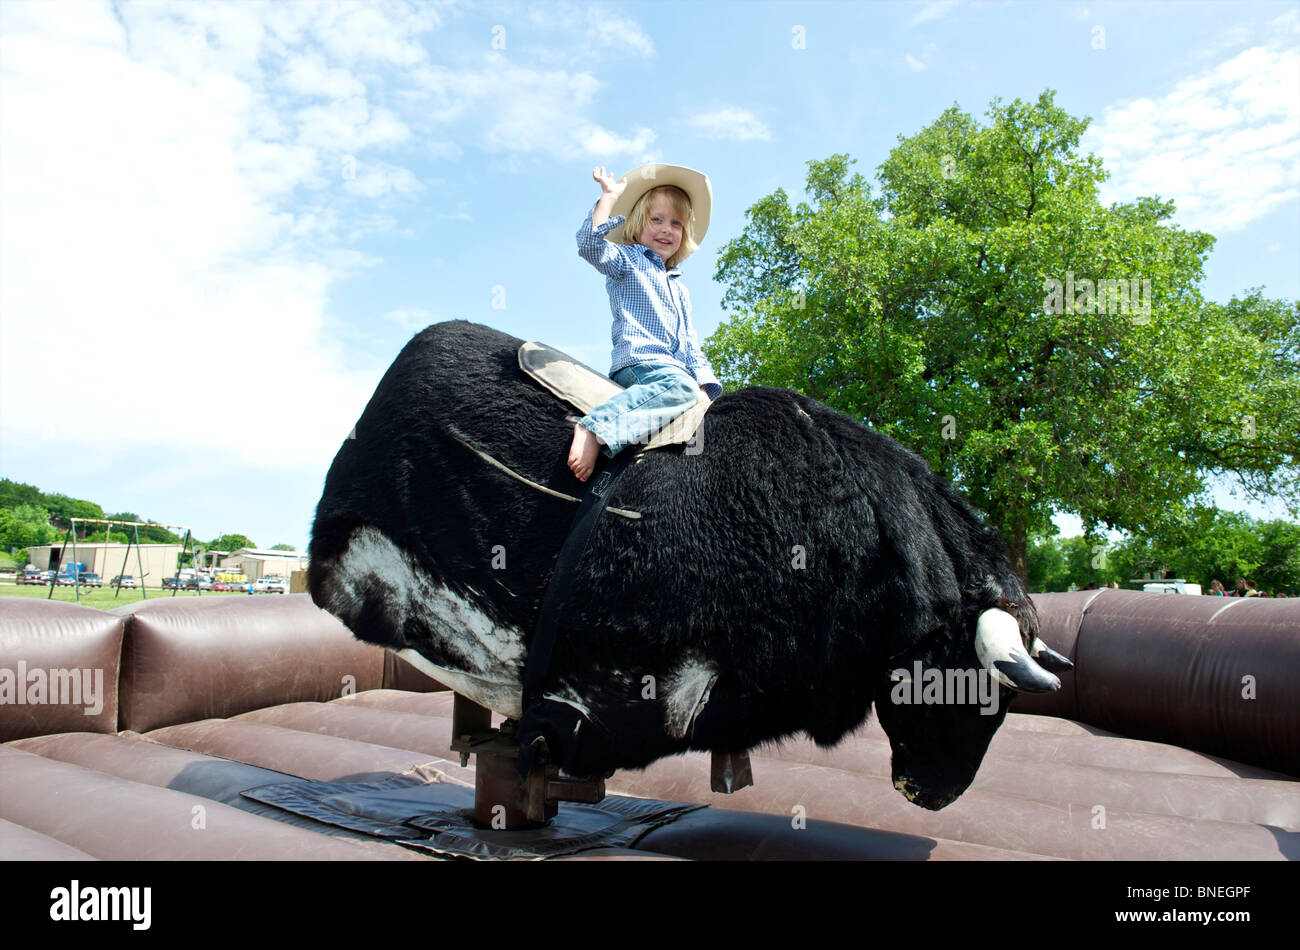 Cowboy trying his luck to stay on the mechanical bull Stock Photo